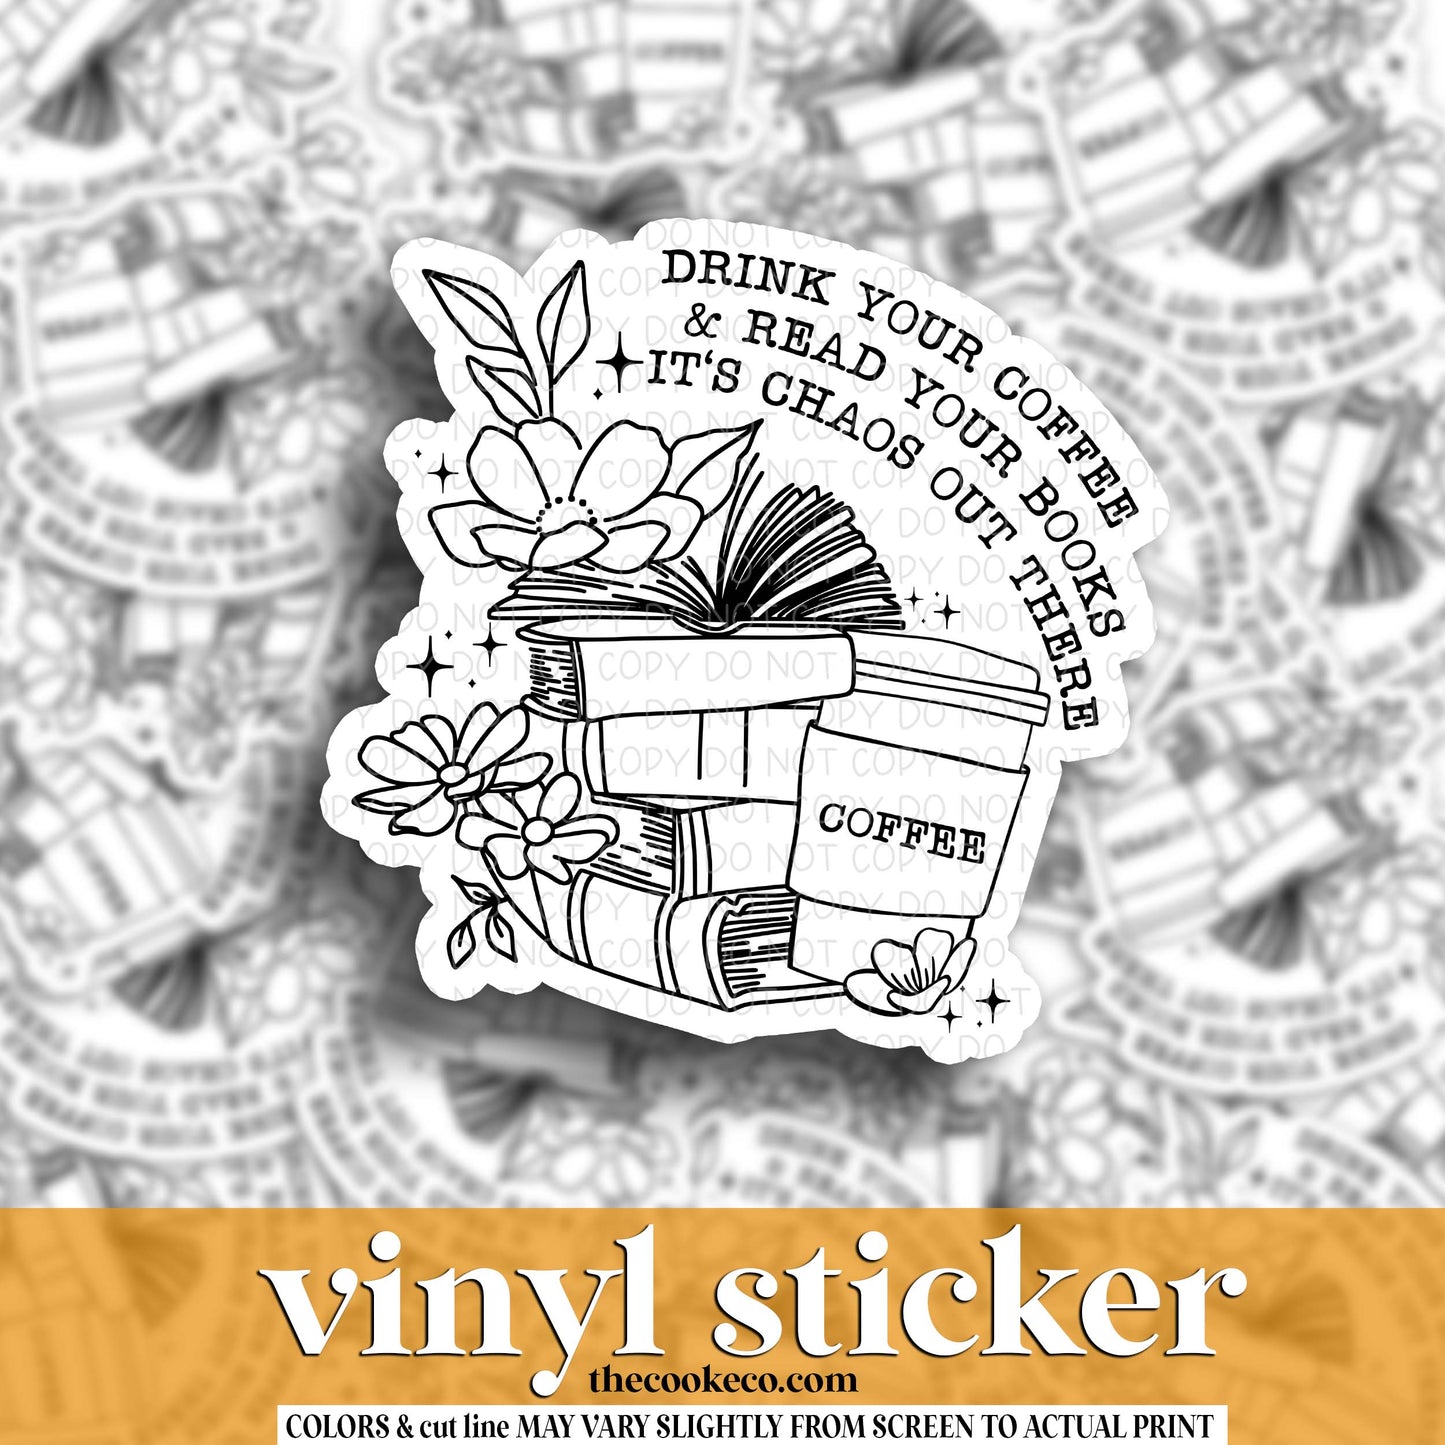 Vinyl Sticker | #V1738 - DRINK YOUR COFFEE & READ YOUR BOOKS IT'S CHAOS OUT THERE